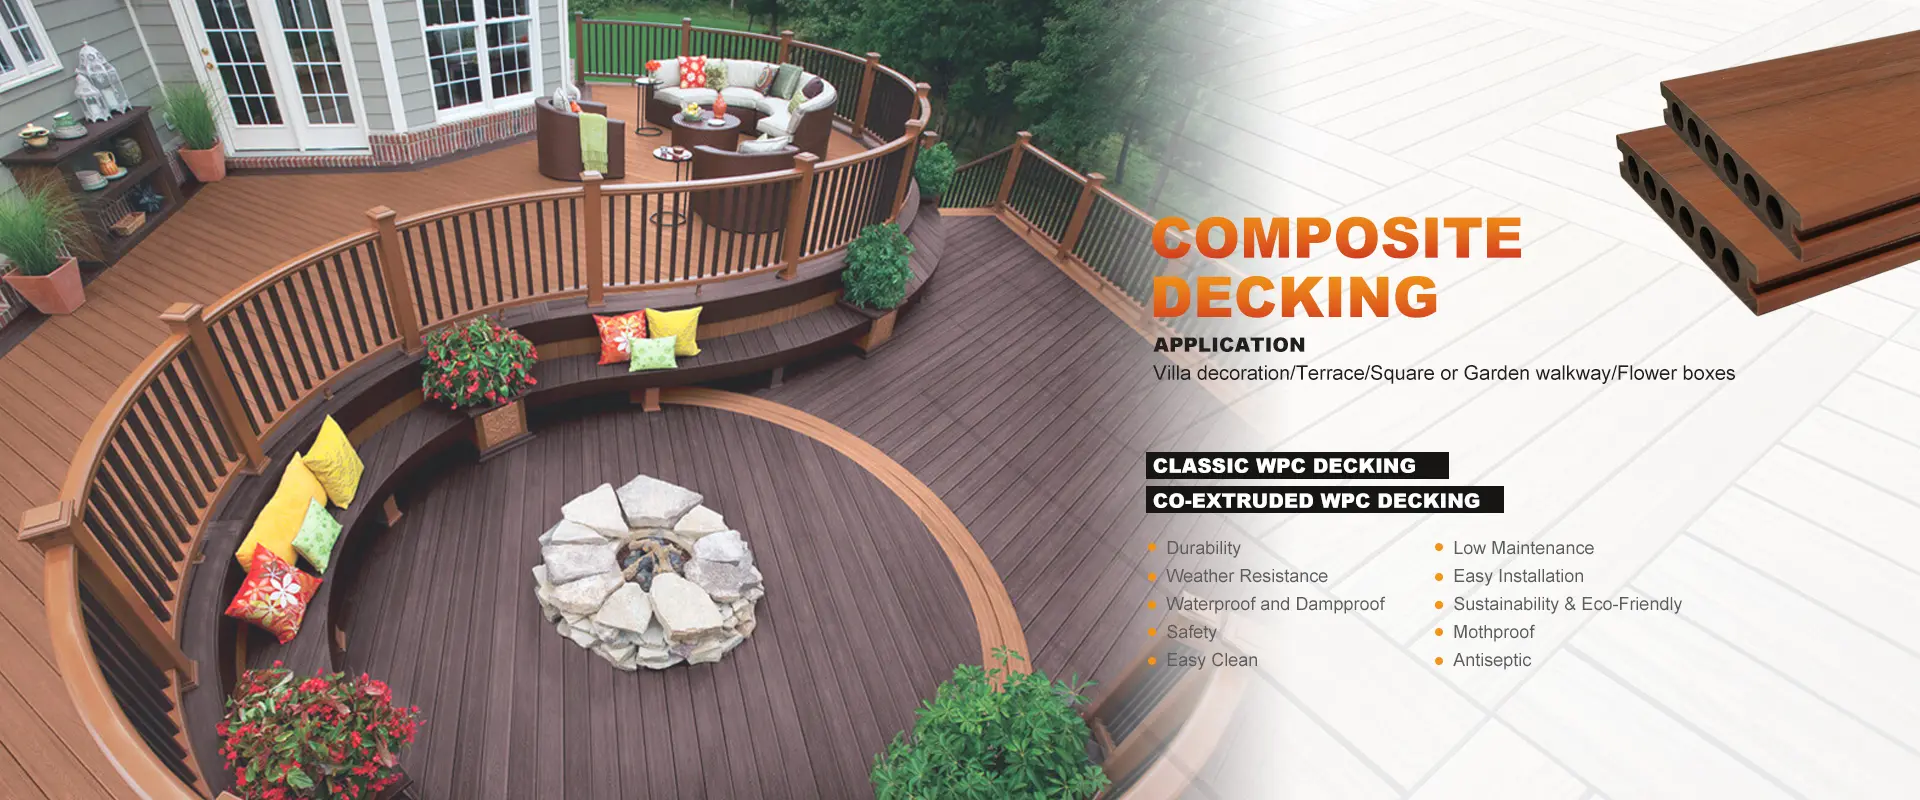 https://www.terceldecking.com/product-category/products/composite-decking/